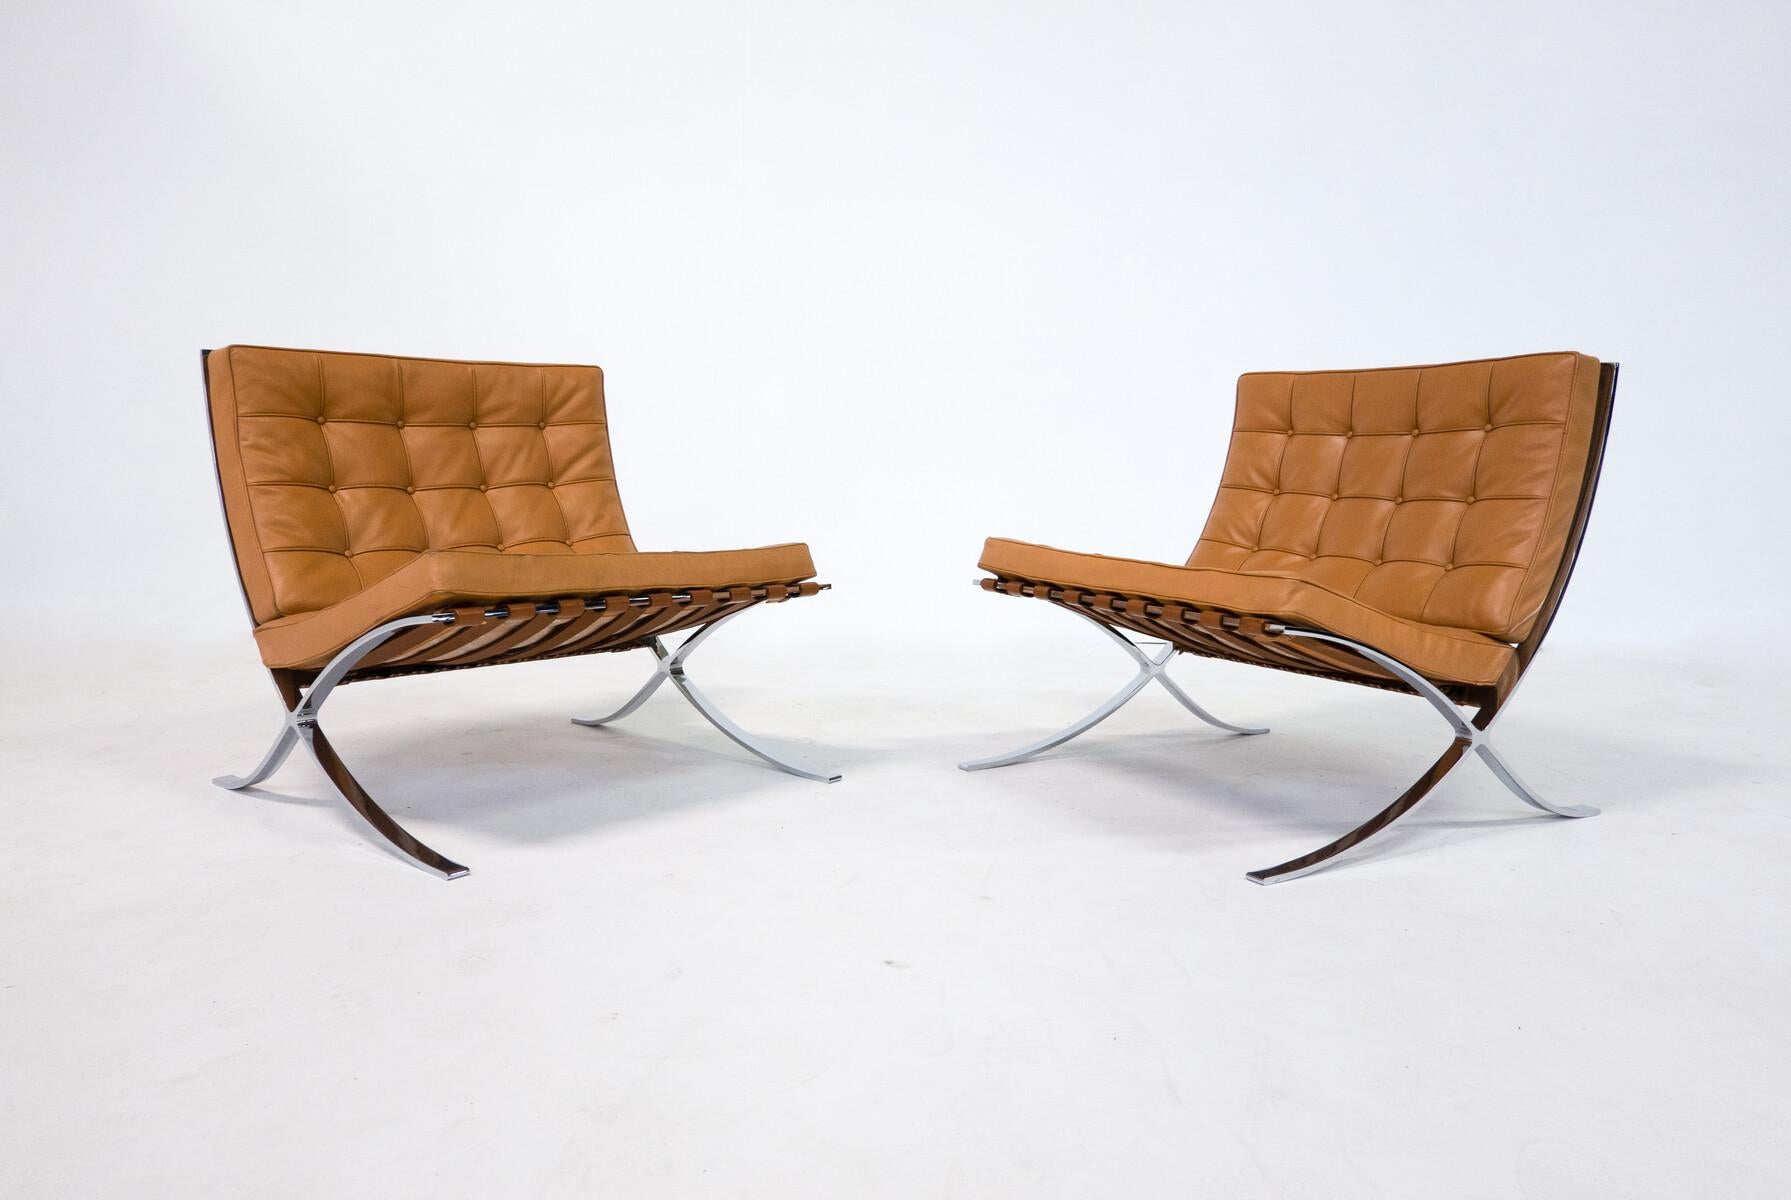 Pair of Cognac Leather Barcelona Chairs by Mies Van Der Rohe for Knoll, 1960s For Sale 10